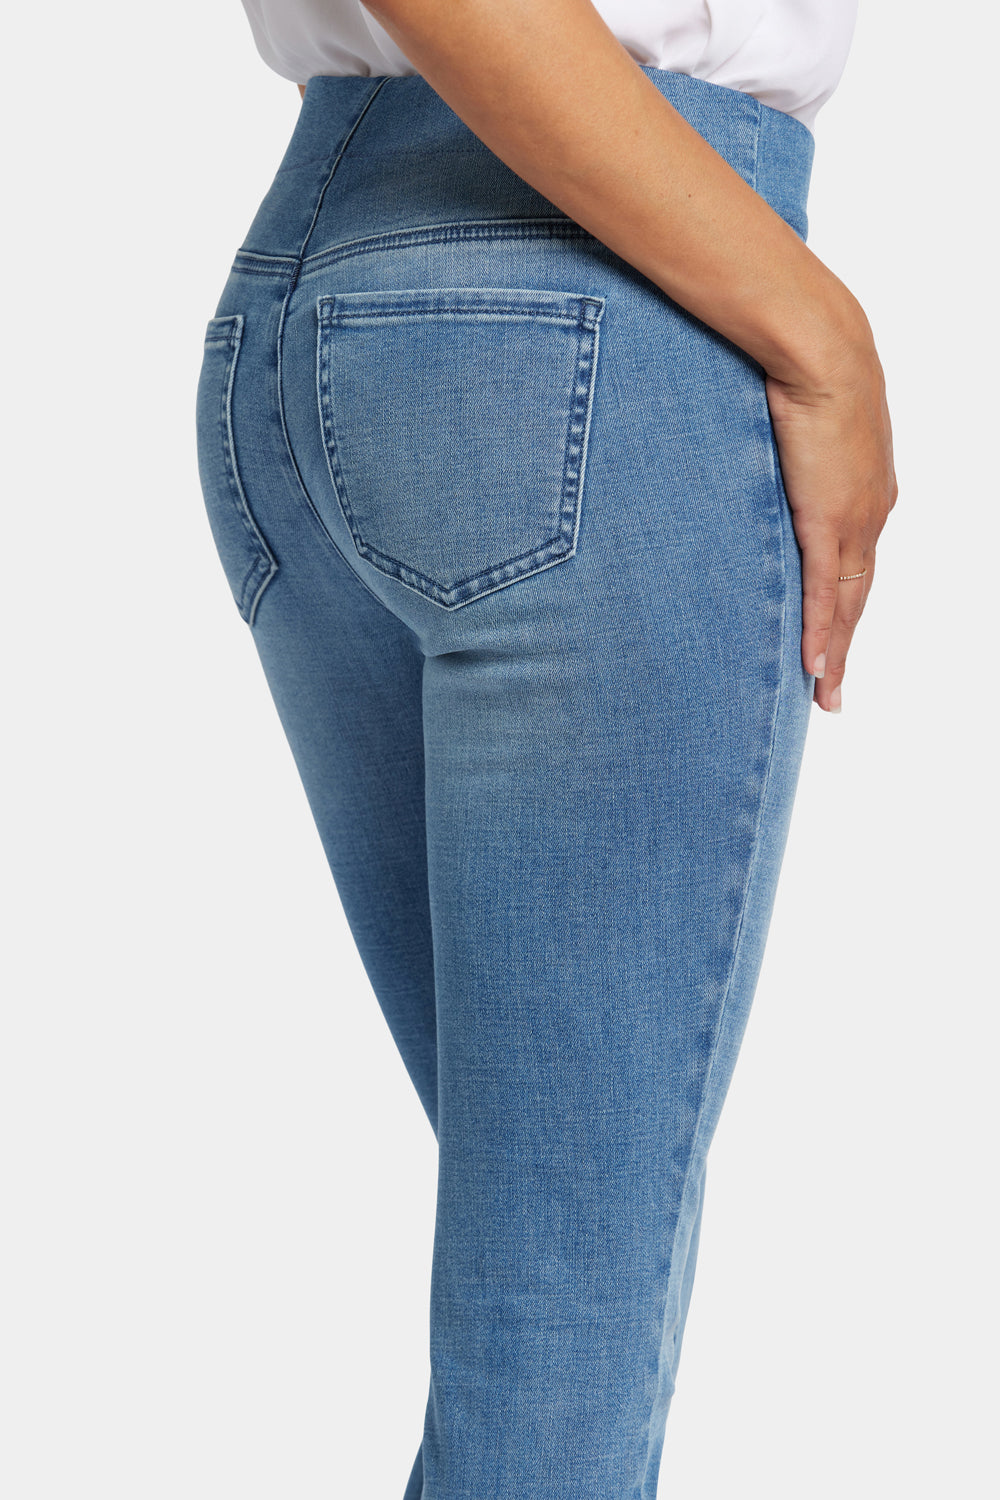 NYDJ Skinny Ankle Pull-On Jeans With Side Slits - Clean Brickell